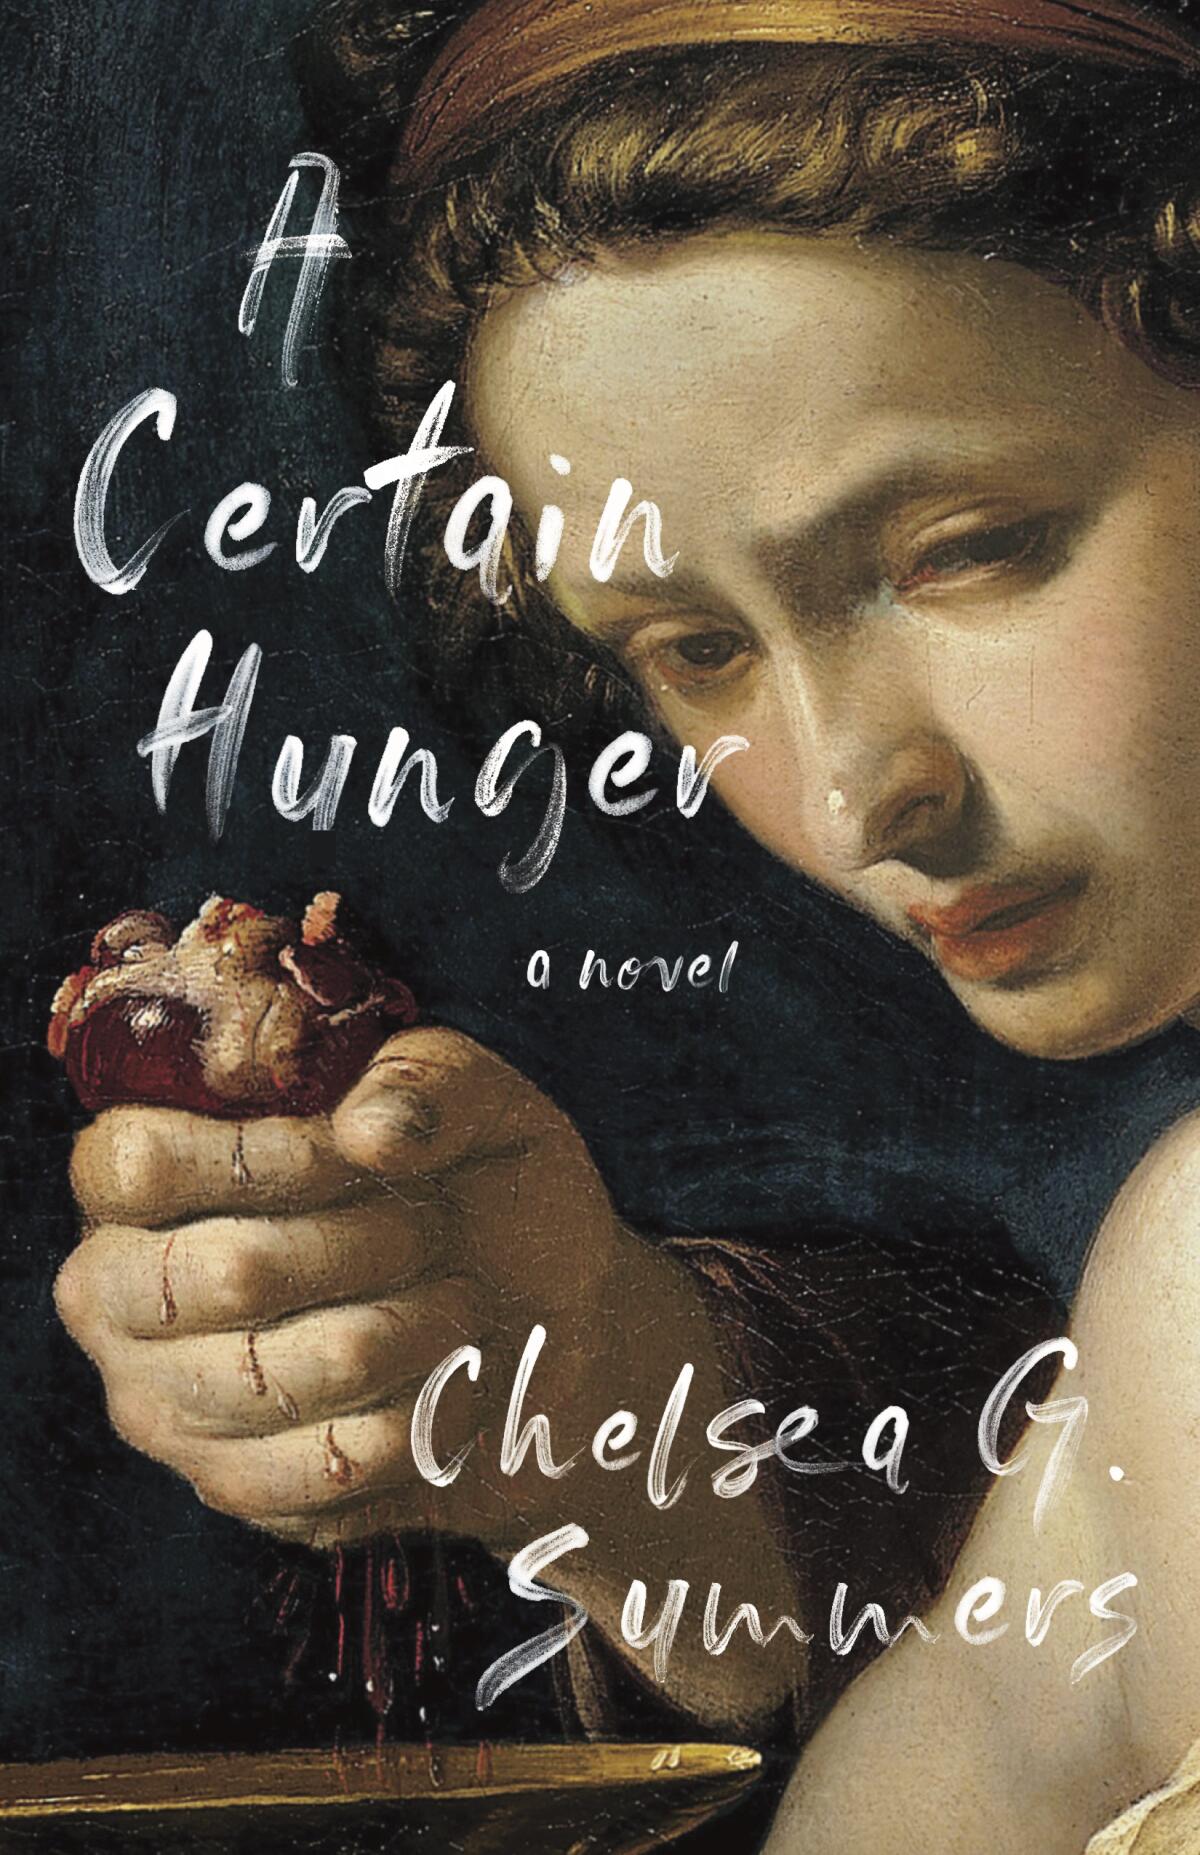 "A Certain Hunger" by Chelsea G. Summers.